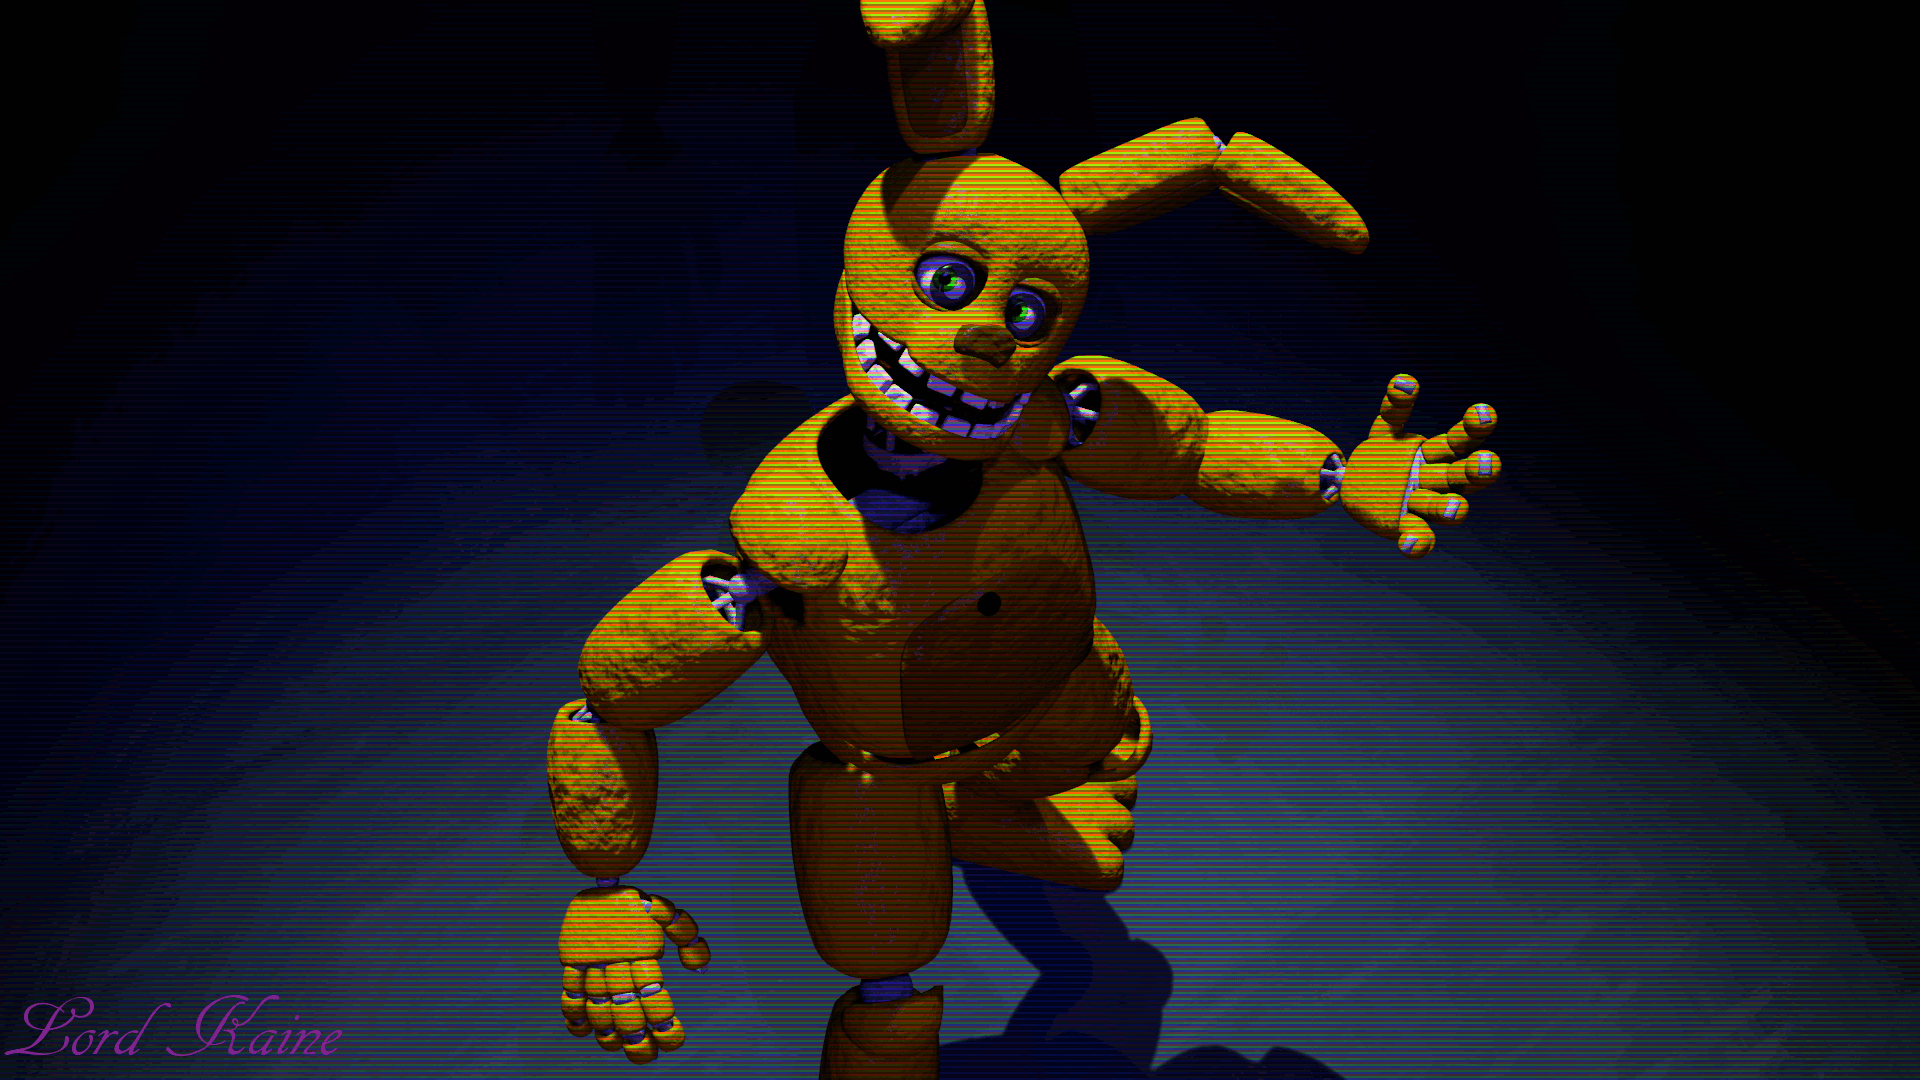 Share fnaf wallpapers hd with your friends. 